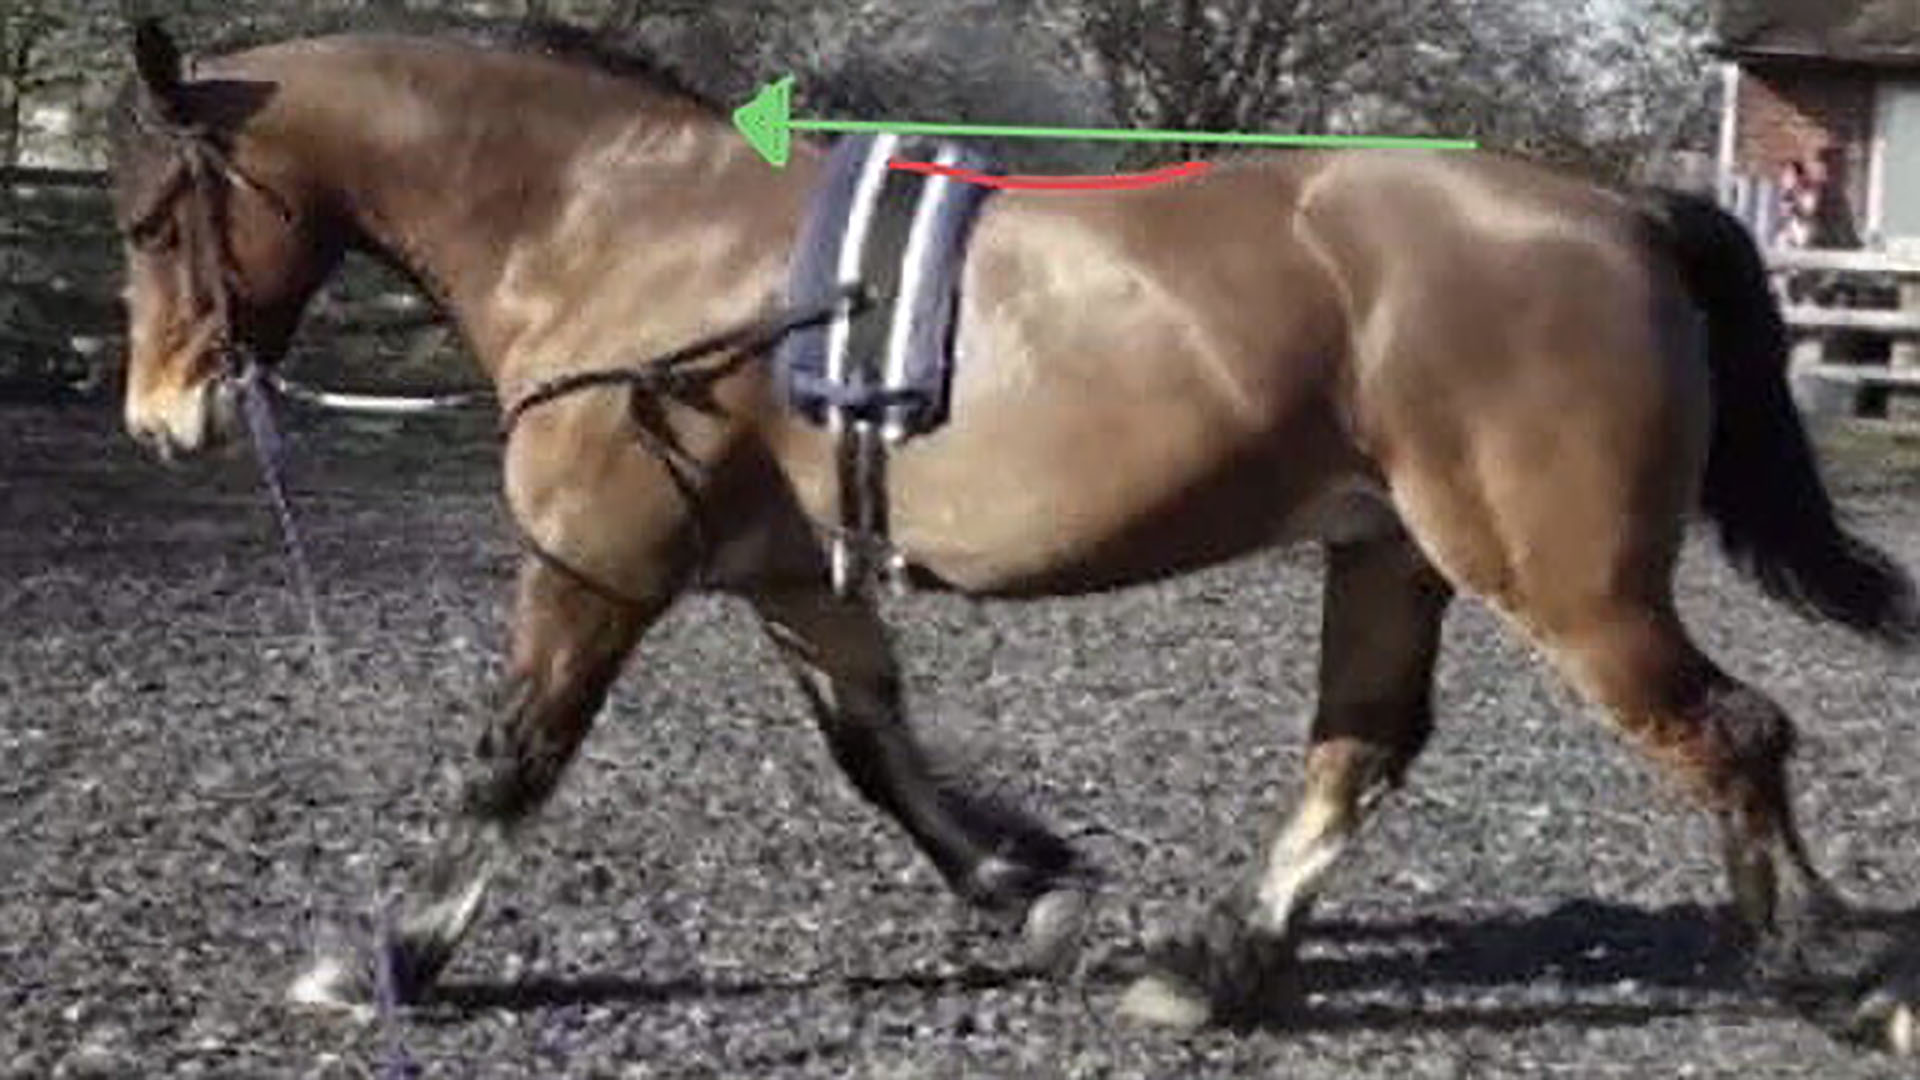 Horse Evenly Developed Muscles and a More Uphill Shape